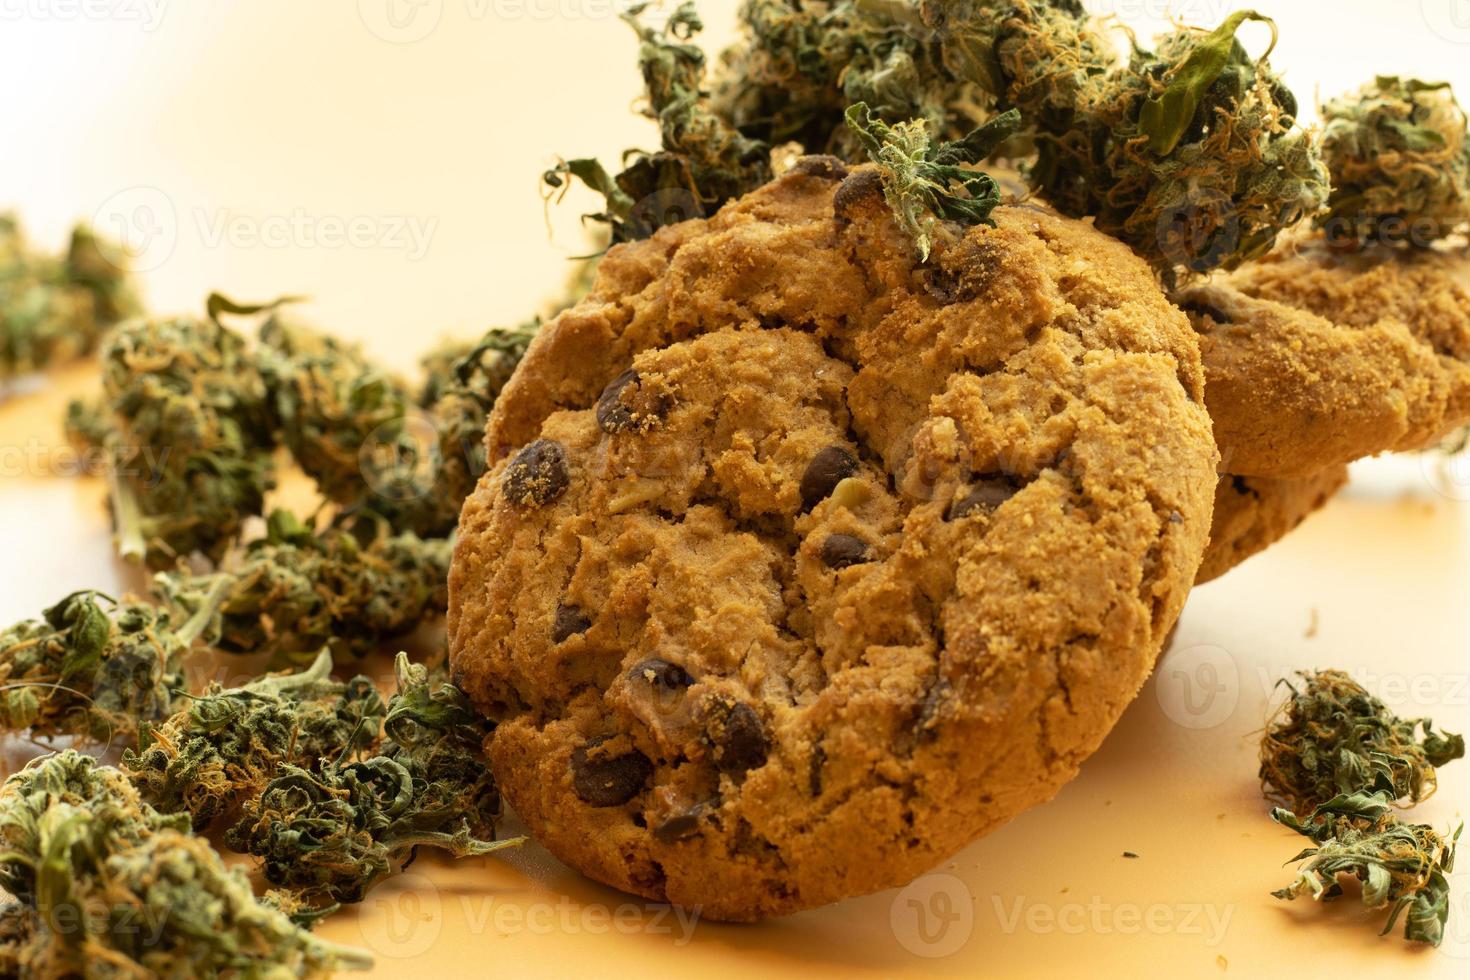 Cannabis product concept, oat cookie and marijuana buds close-up. Legal weed use photo